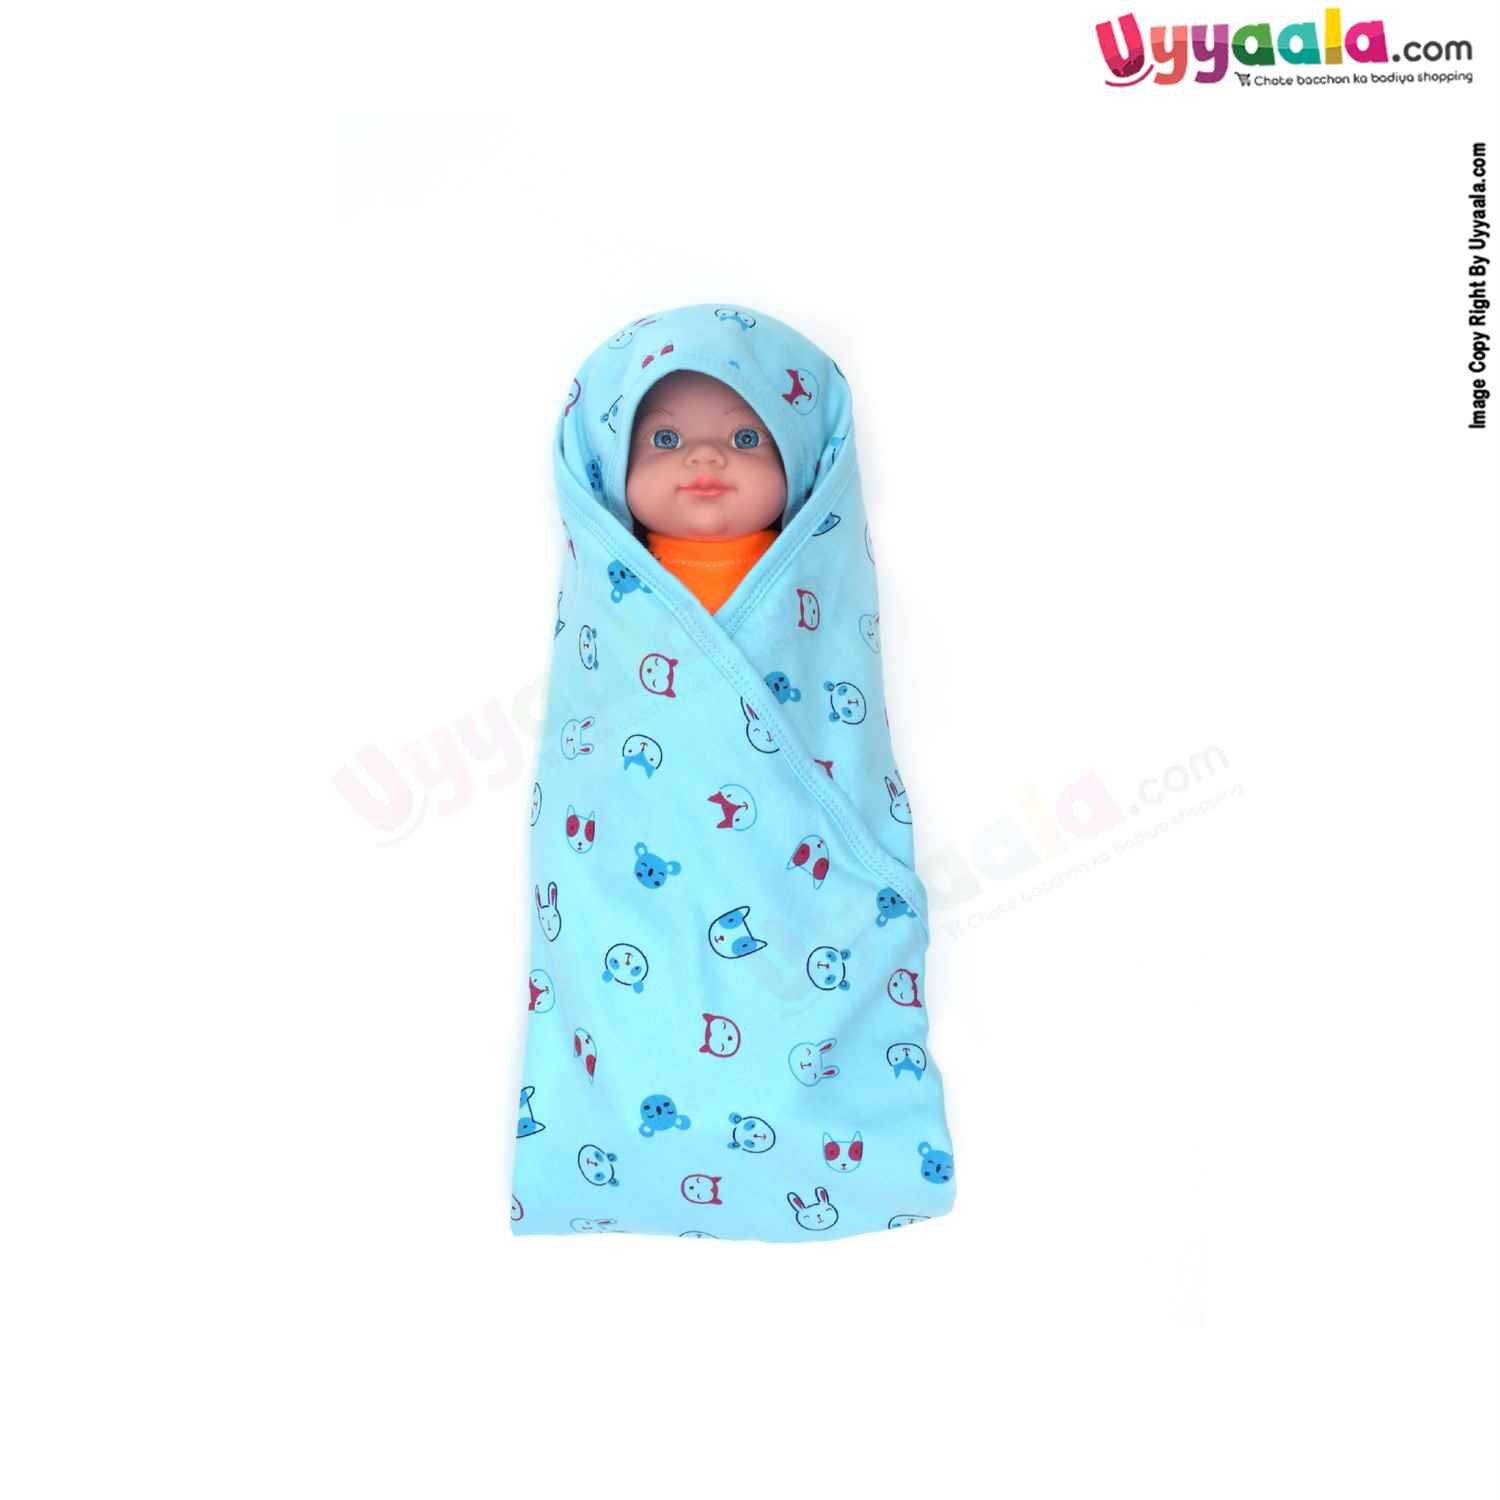 Hosiery Cotton Hooded Towel for Babies with Animal Print 0-12m Age, Size (86*72cm)- Blue